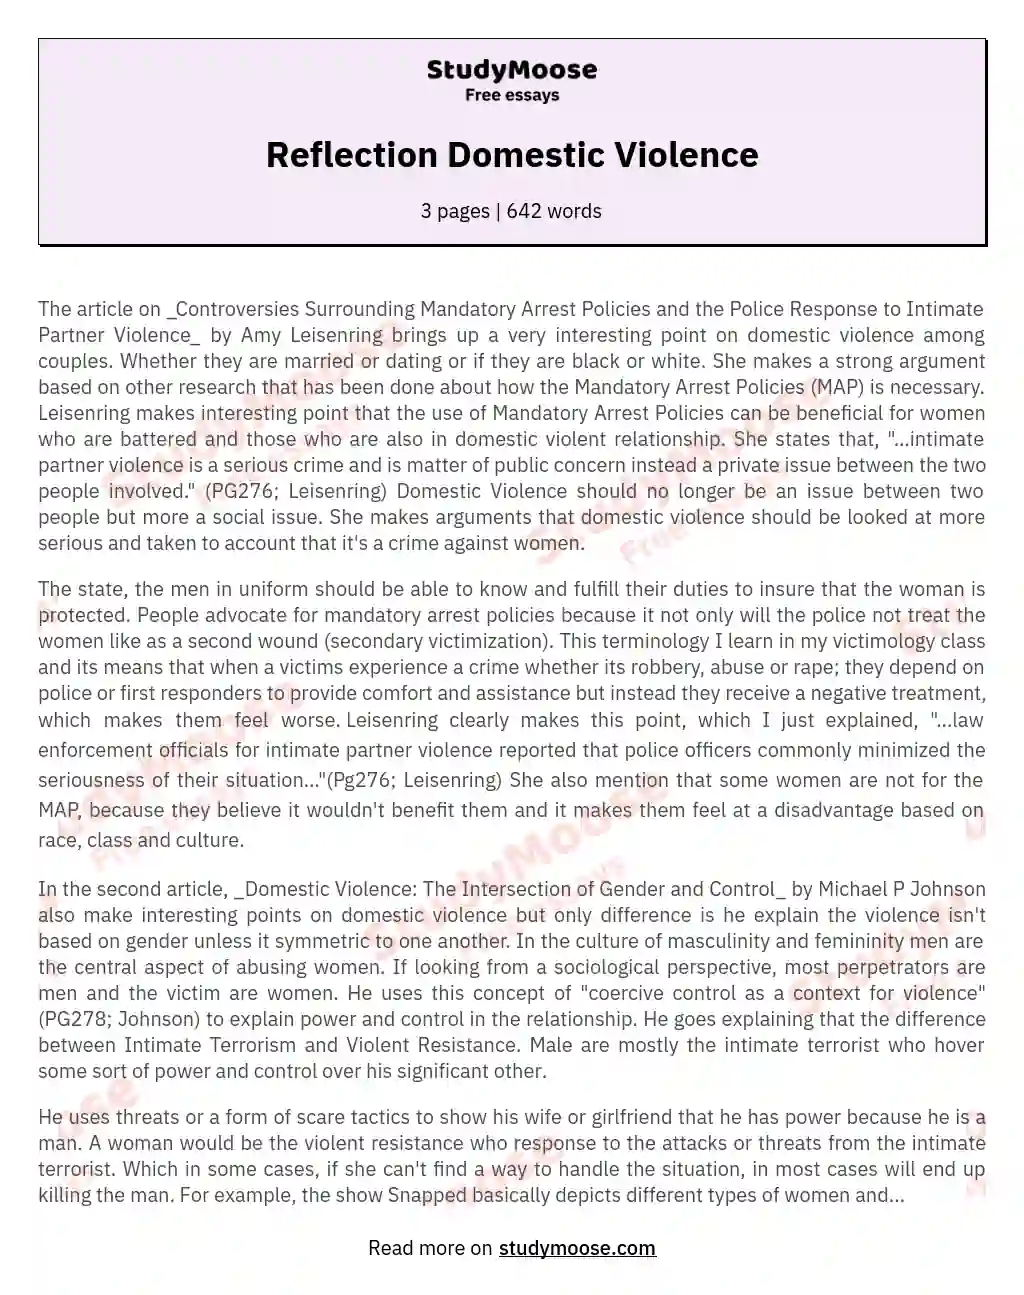 domestic violence introduction essay